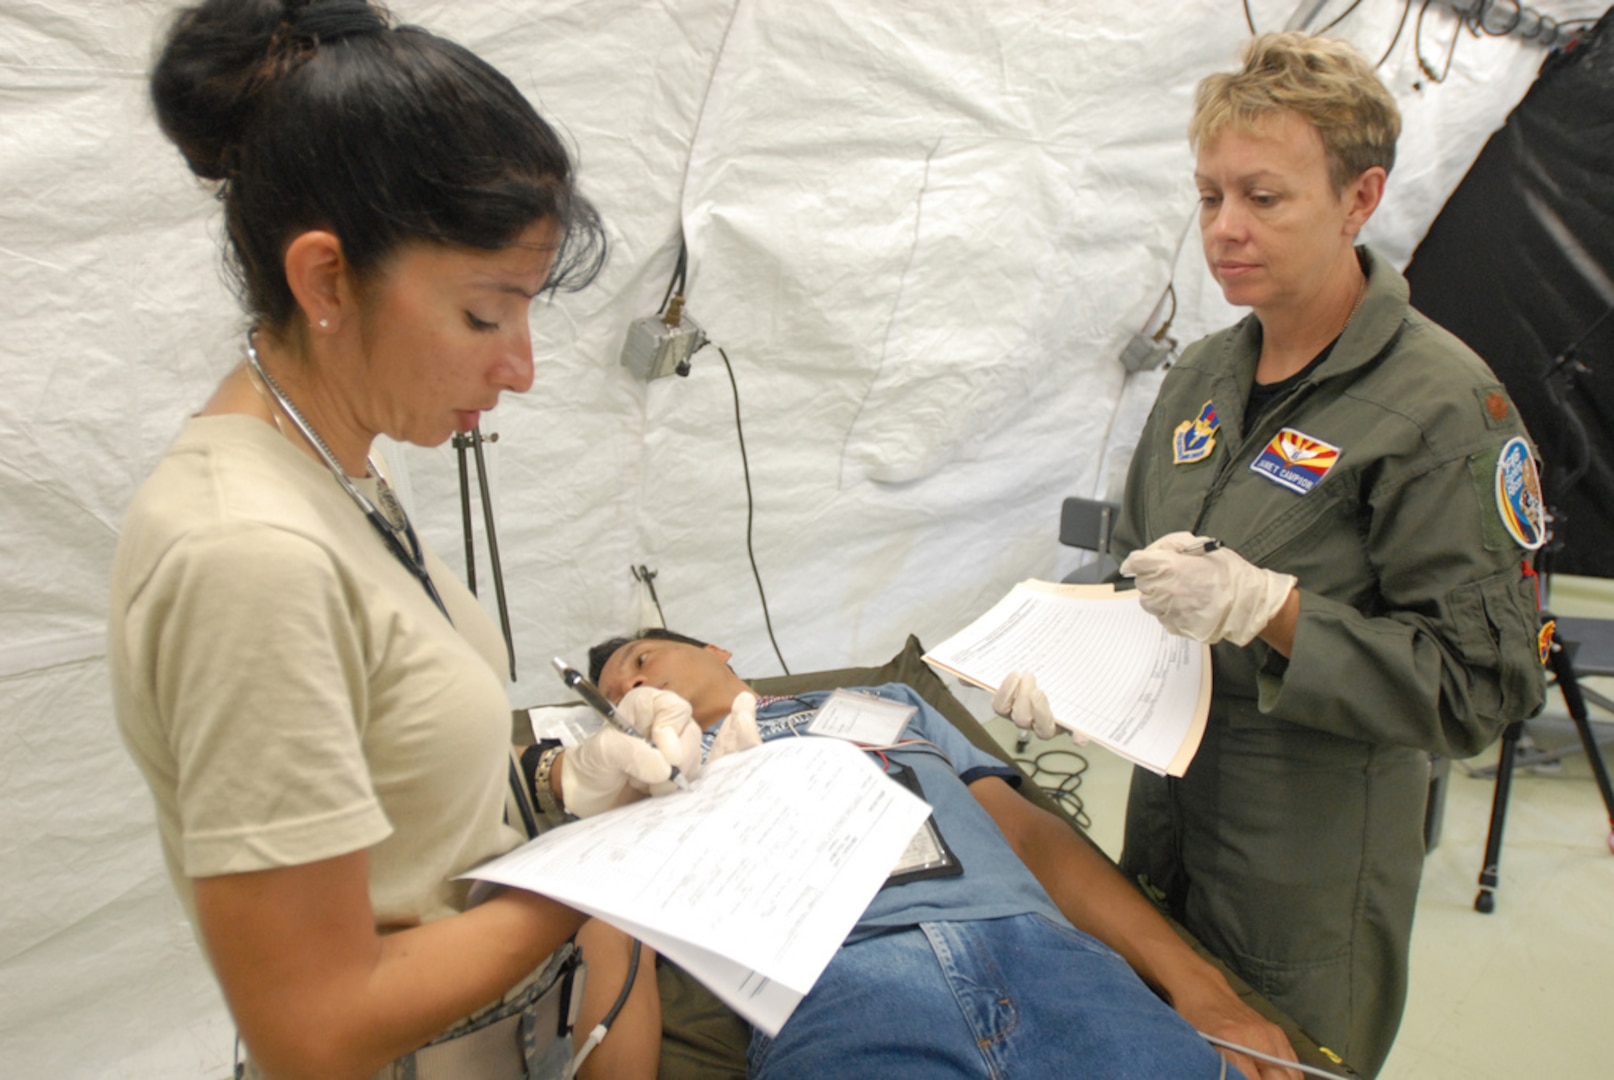 Air Force Lt. Col. Jackie Federico-Lopez, a clinical nurse with the 162nd Medical Group of the Arizona National Guard, and Maj. Janet Campion, a flight surgeon also with the 162nd, evaluate a victim during Vigilant Guard Guam, Aug. 24, 2010. The Airmen are part of the emergency medicine portion of the training exercise.